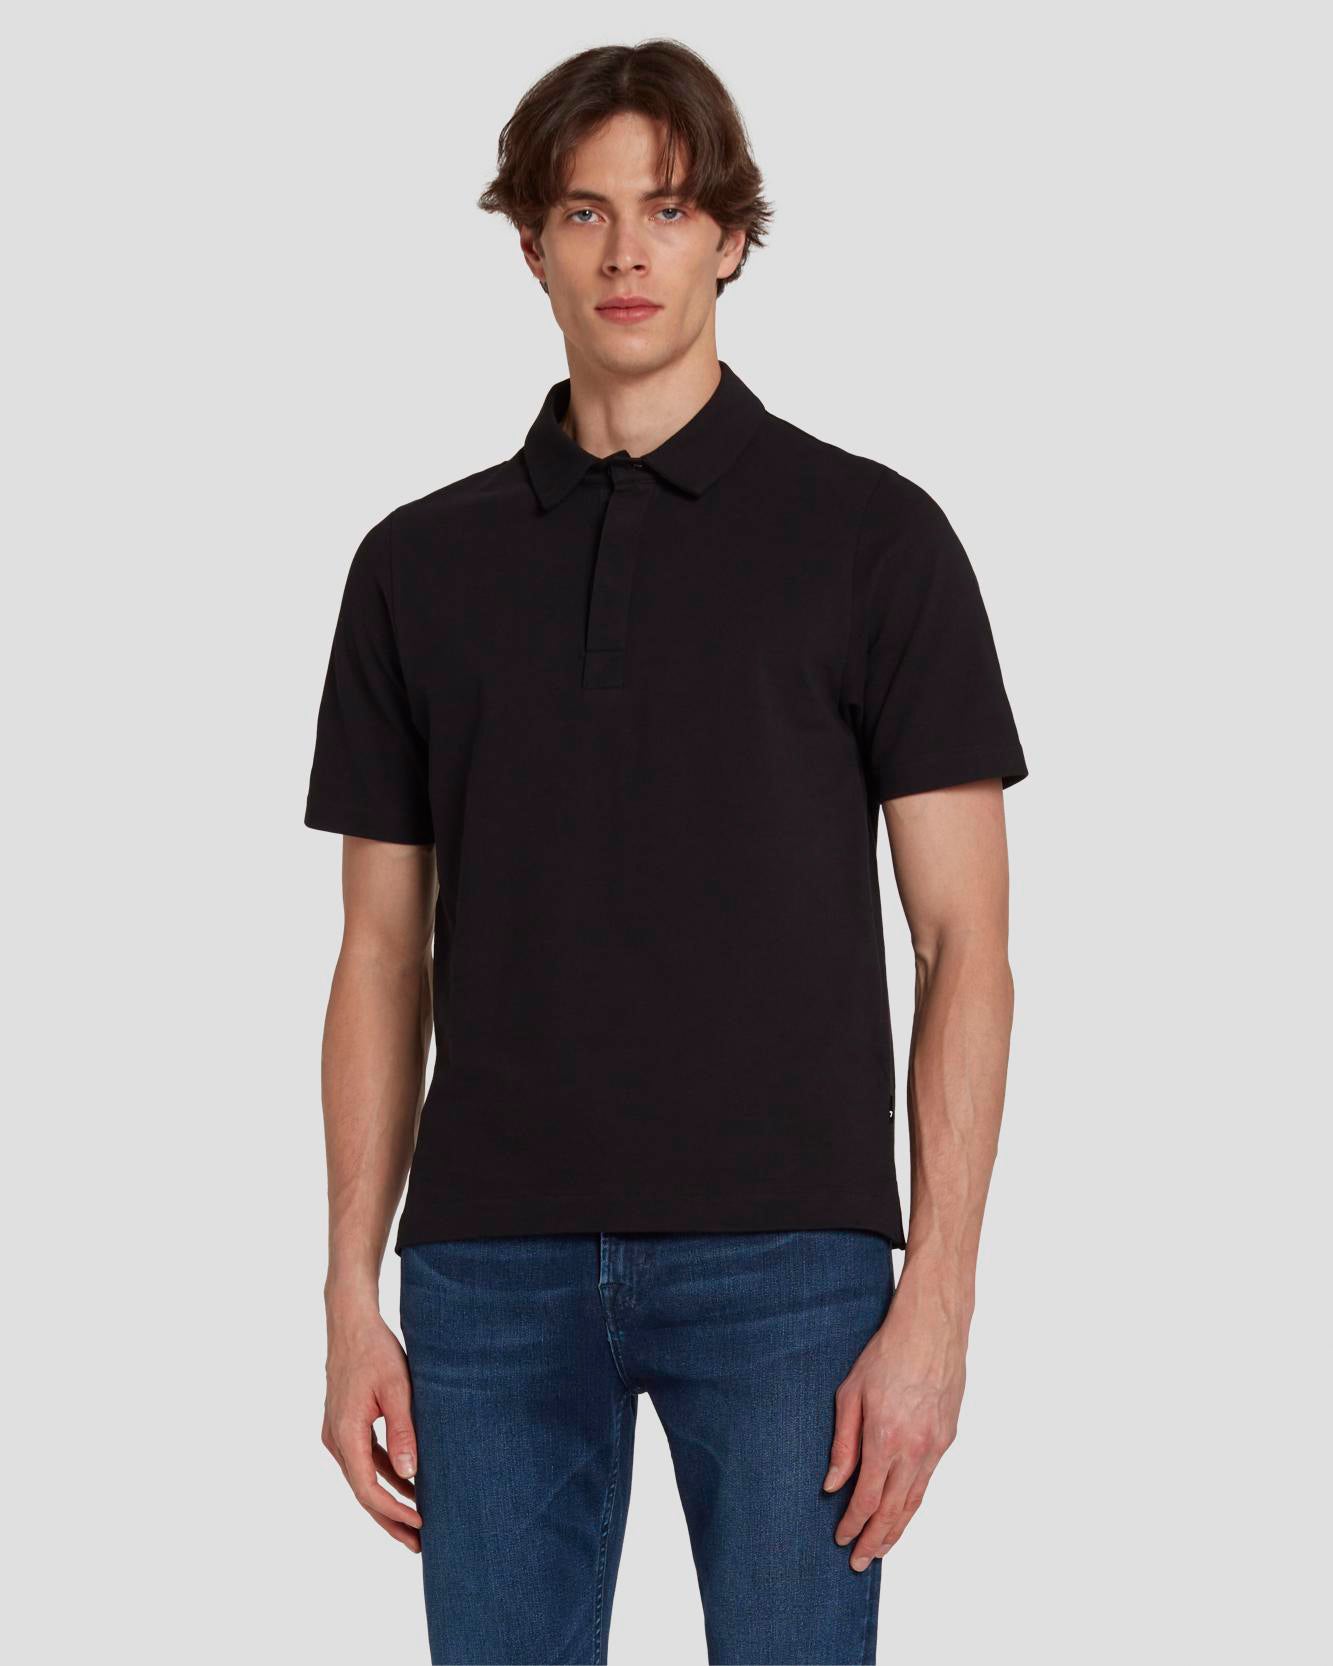 7 For All Mankind Pique Knit Polo in Black 7MSMMM35BLK